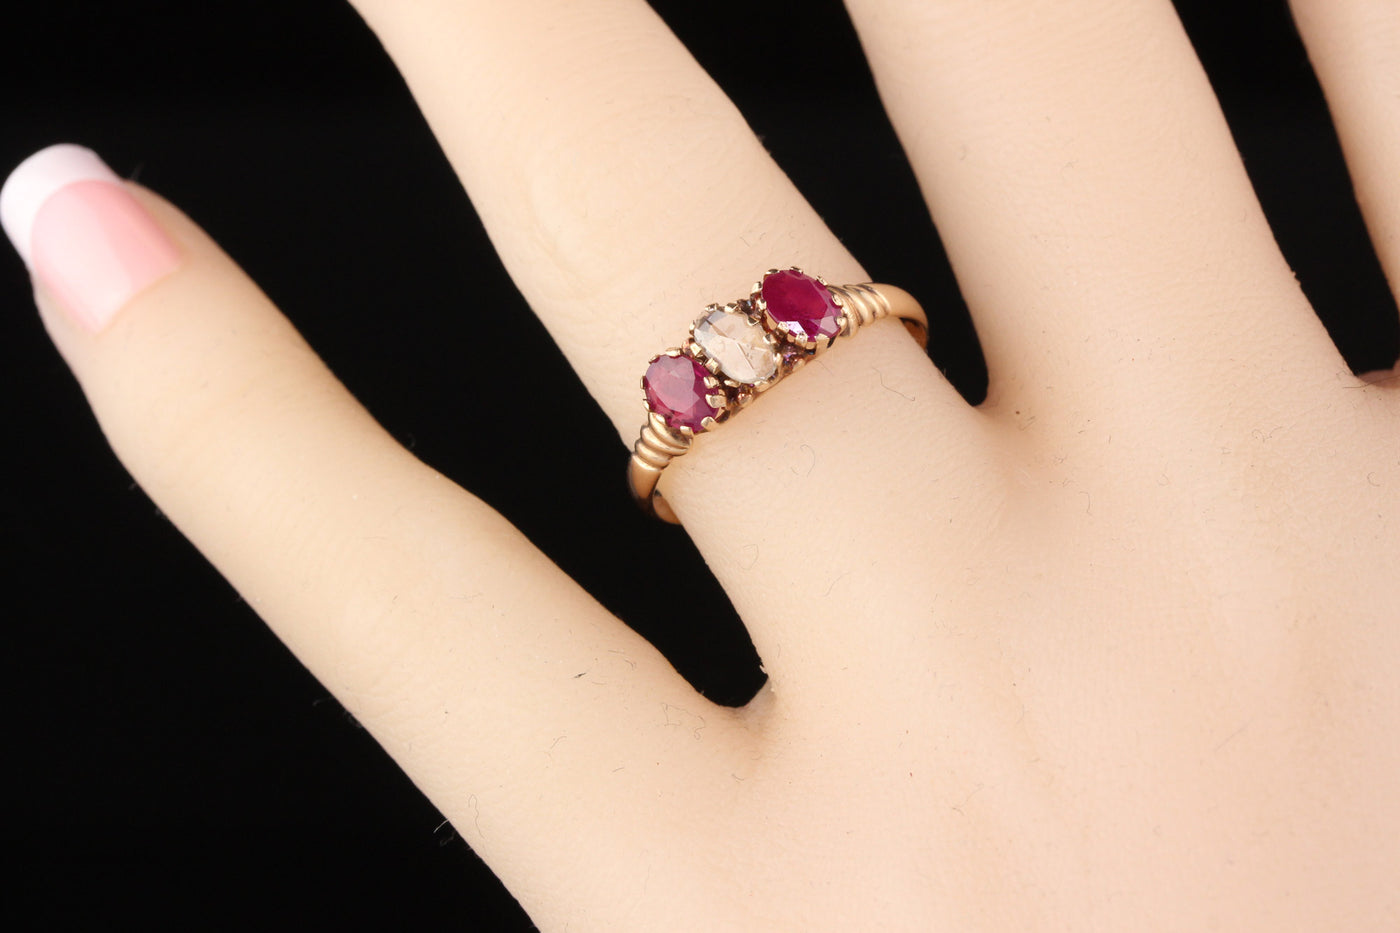 Antique Victorian 10K Rose Gold Rose Cut Diamond & Ruby 3-Stone Engagement Ring